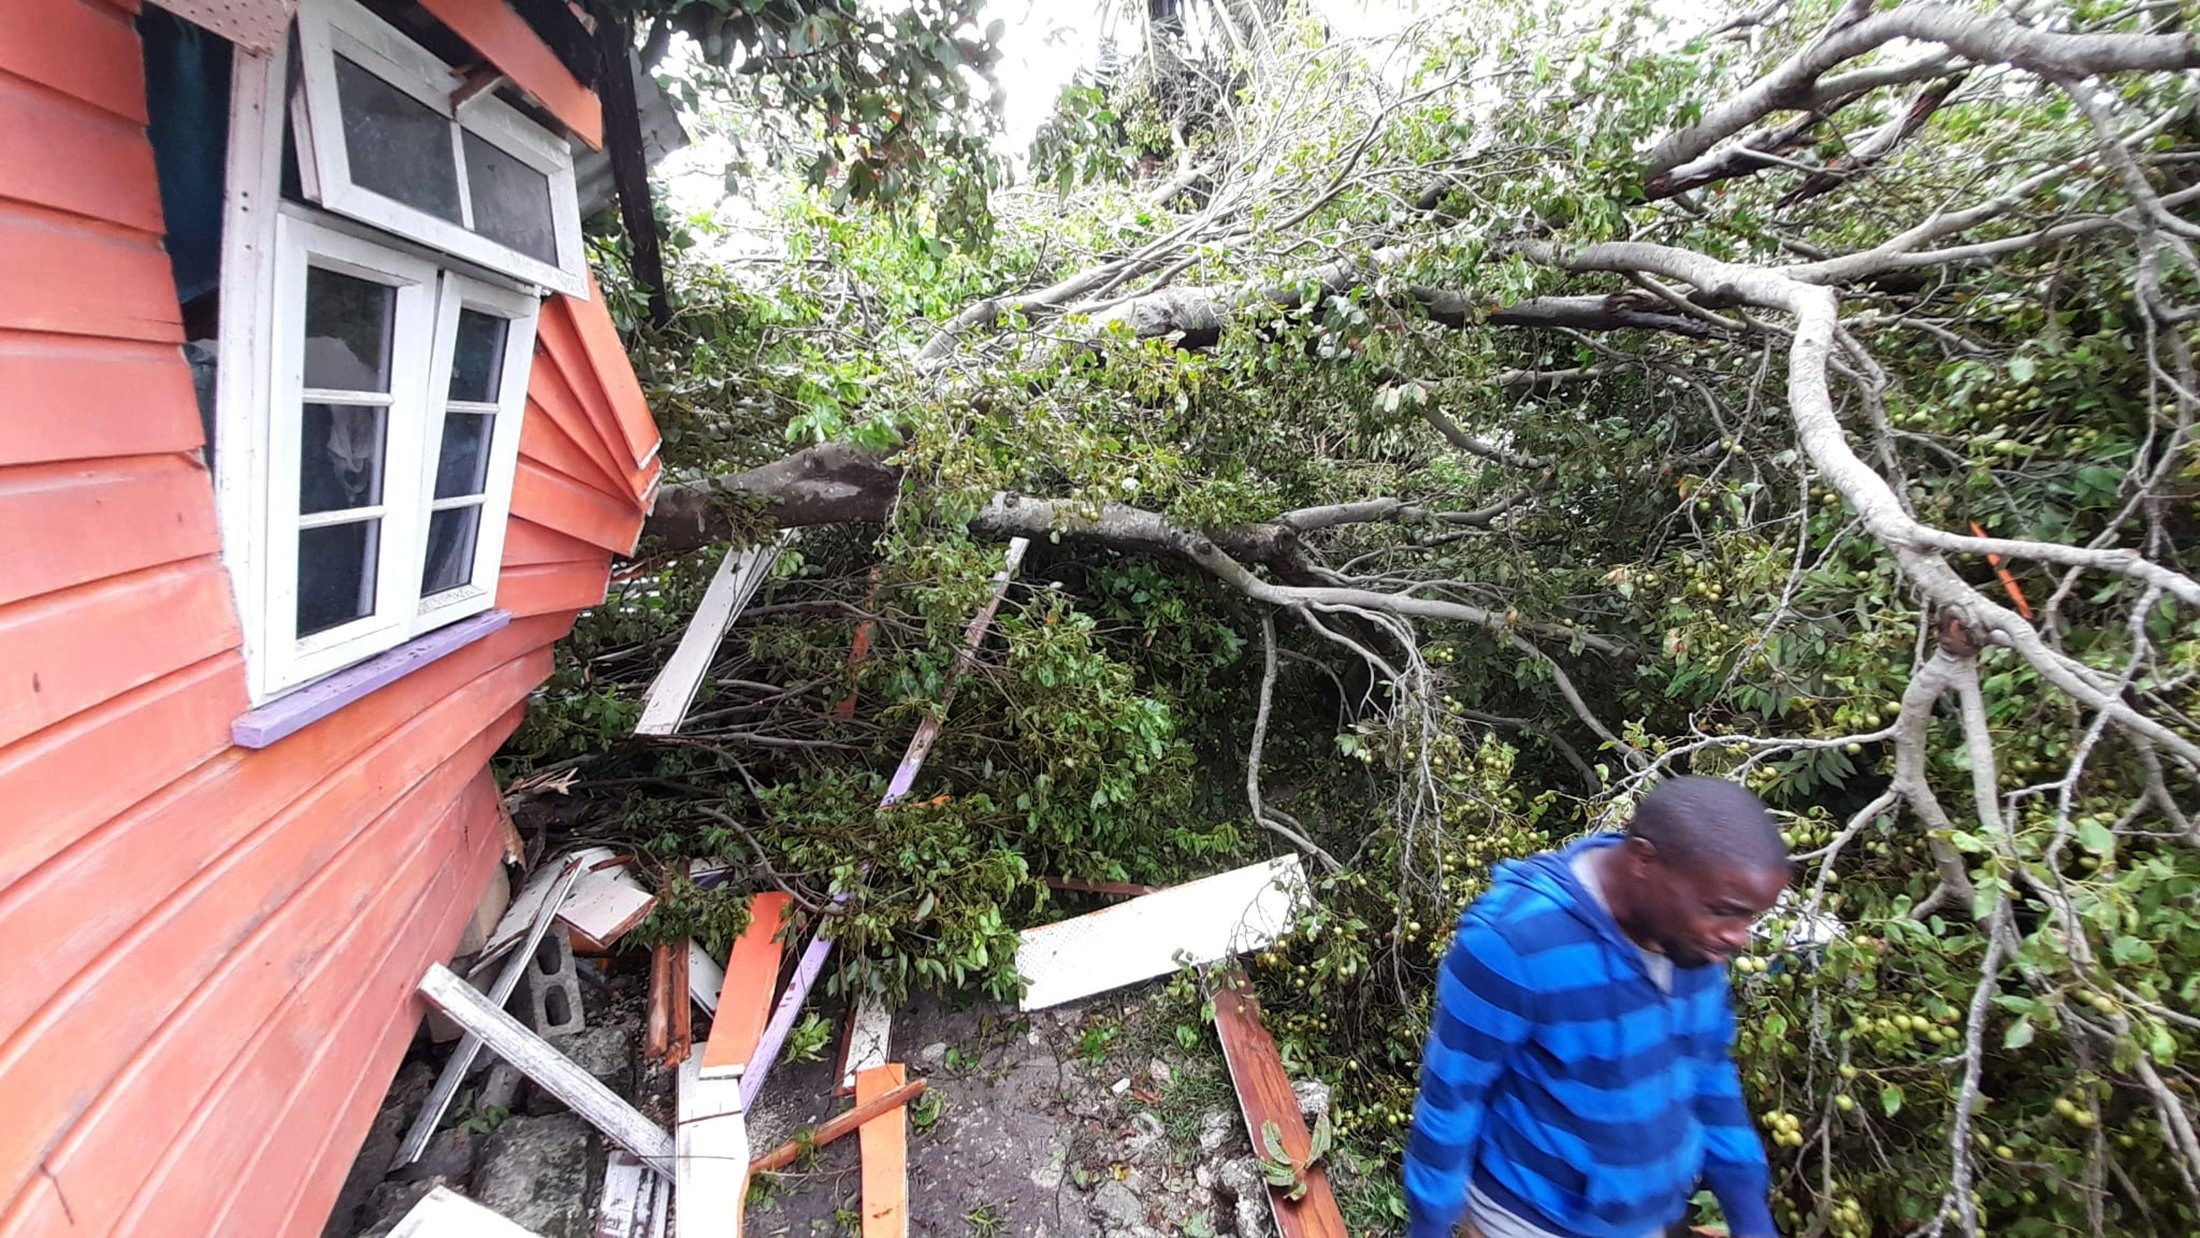 A man views damage to a home after strong winds of Hurricane Elsa passed St. Michael, Barbados, July 2, 2021. (Reuters Photo)